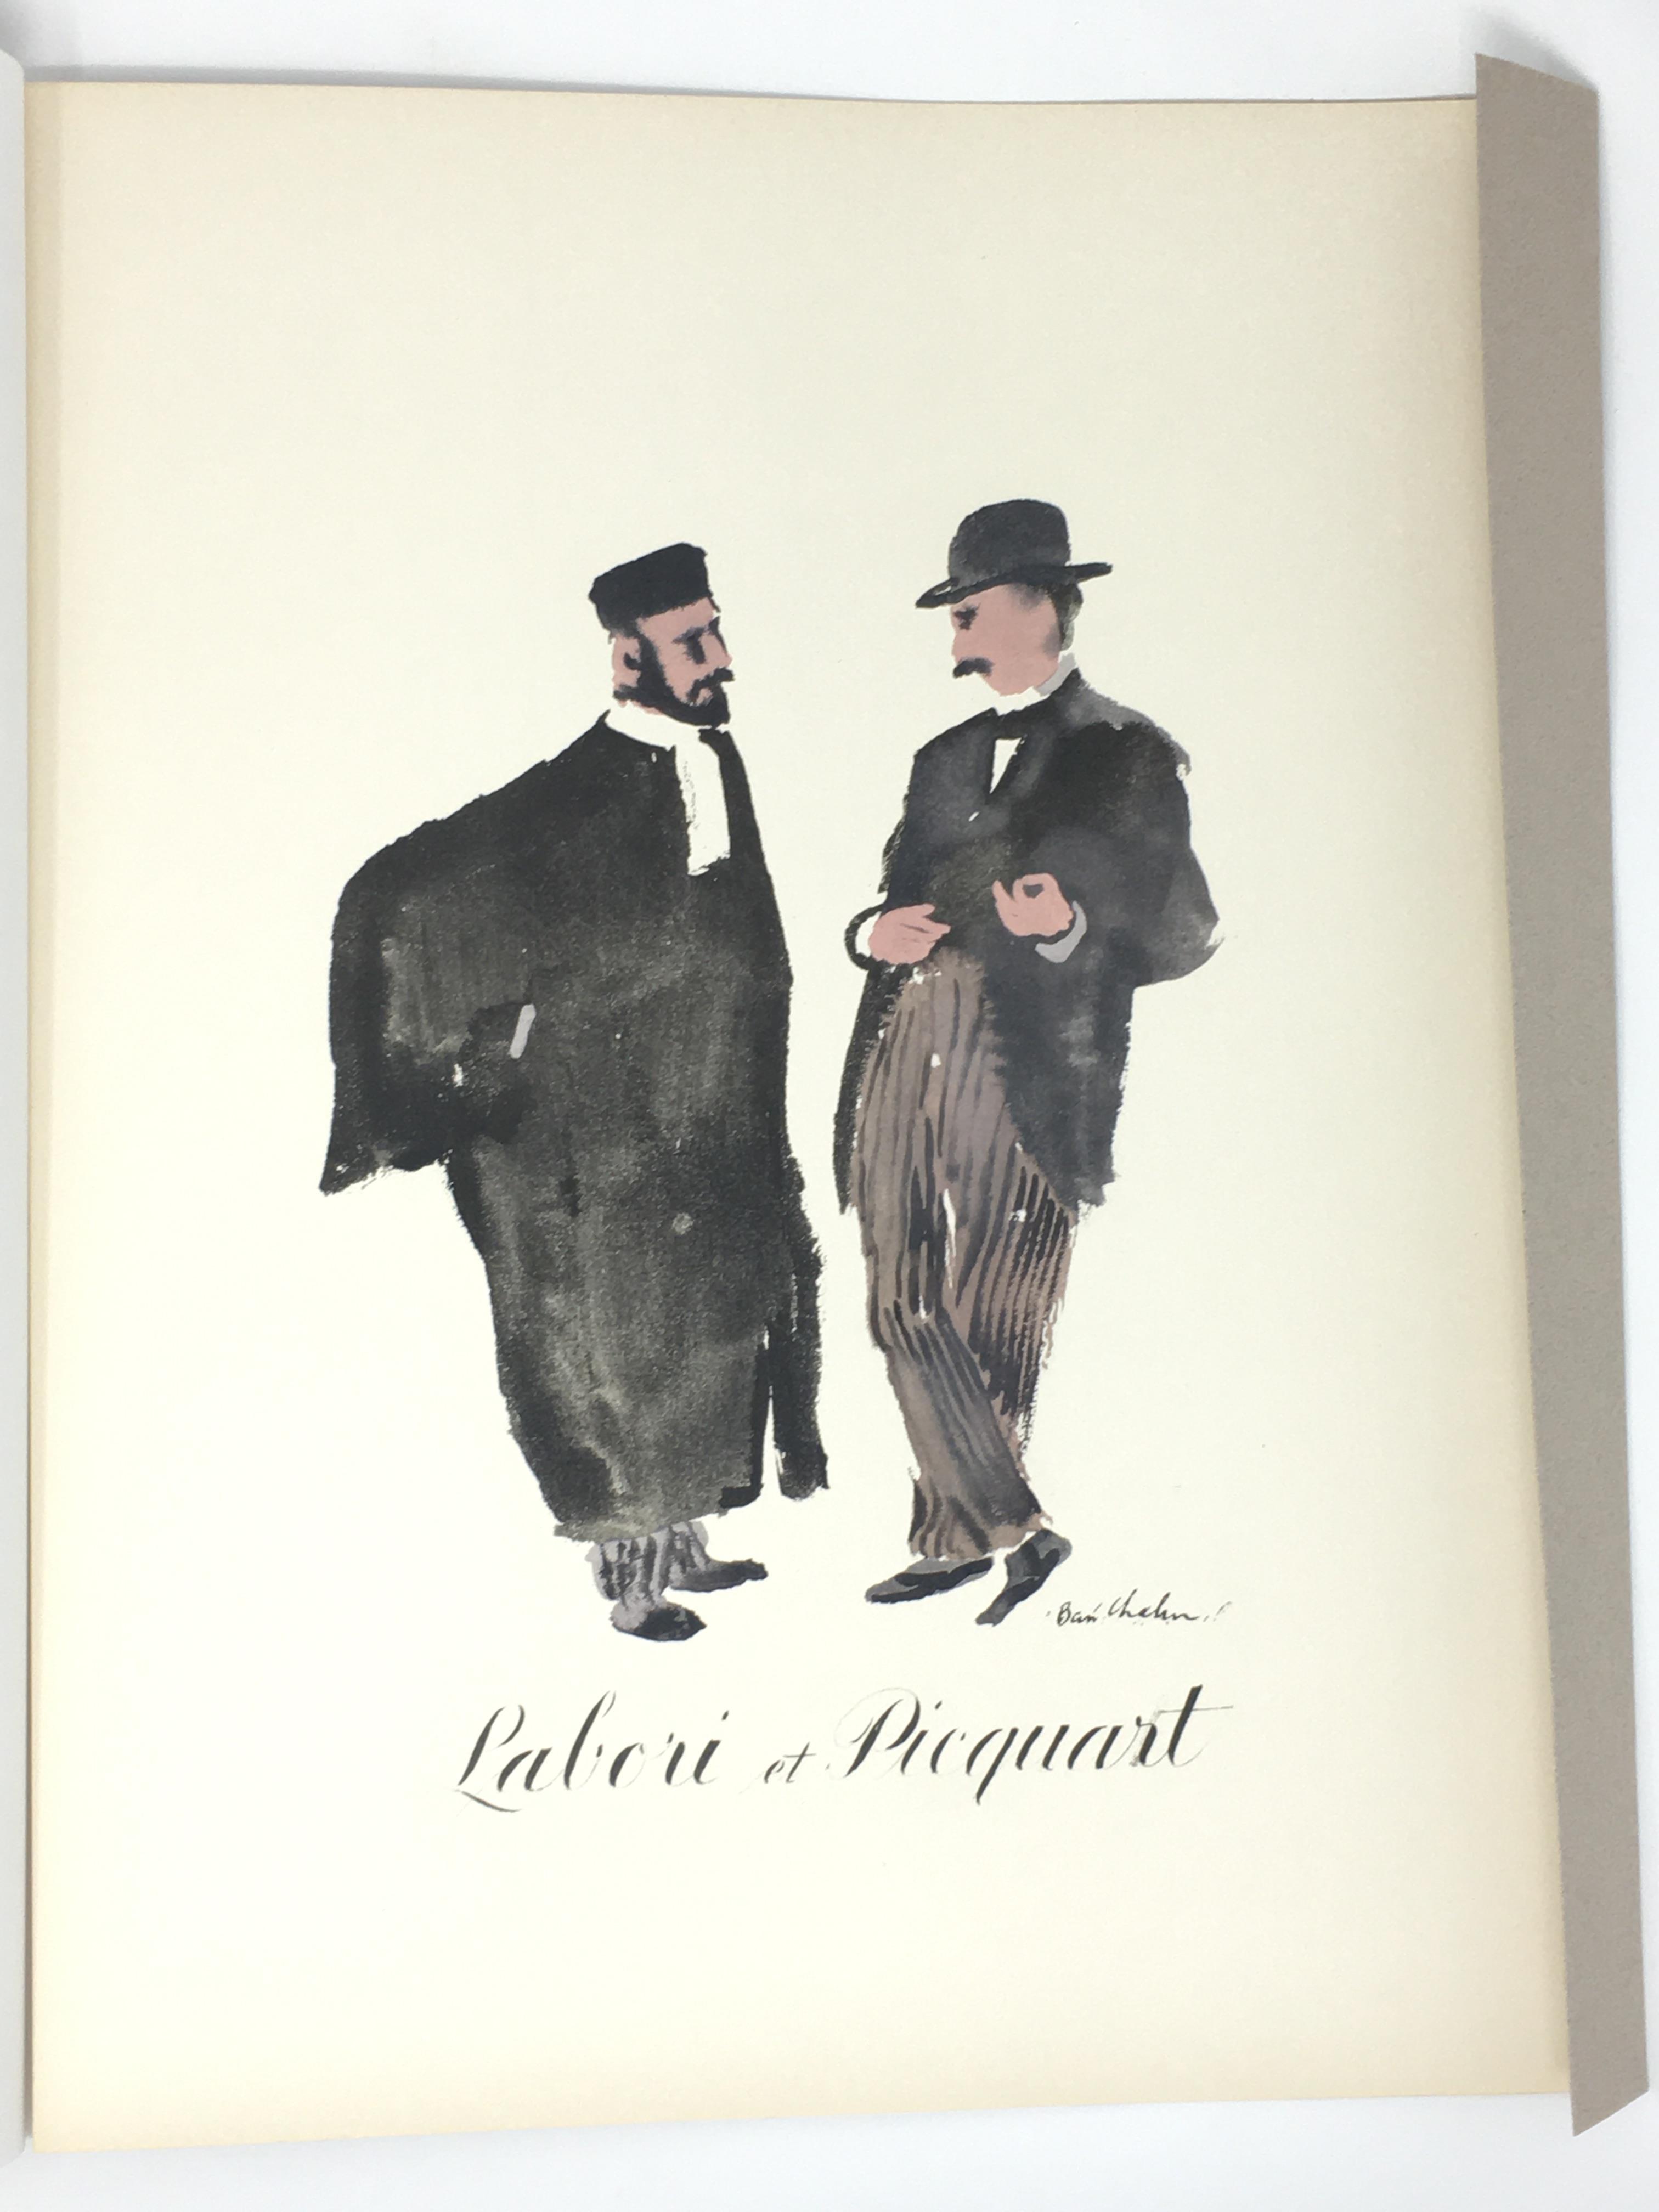 Dreyfus Affair - Book Collection featuring The Ben Shahn Prints (Limited First Edition) - Image 35 of 73